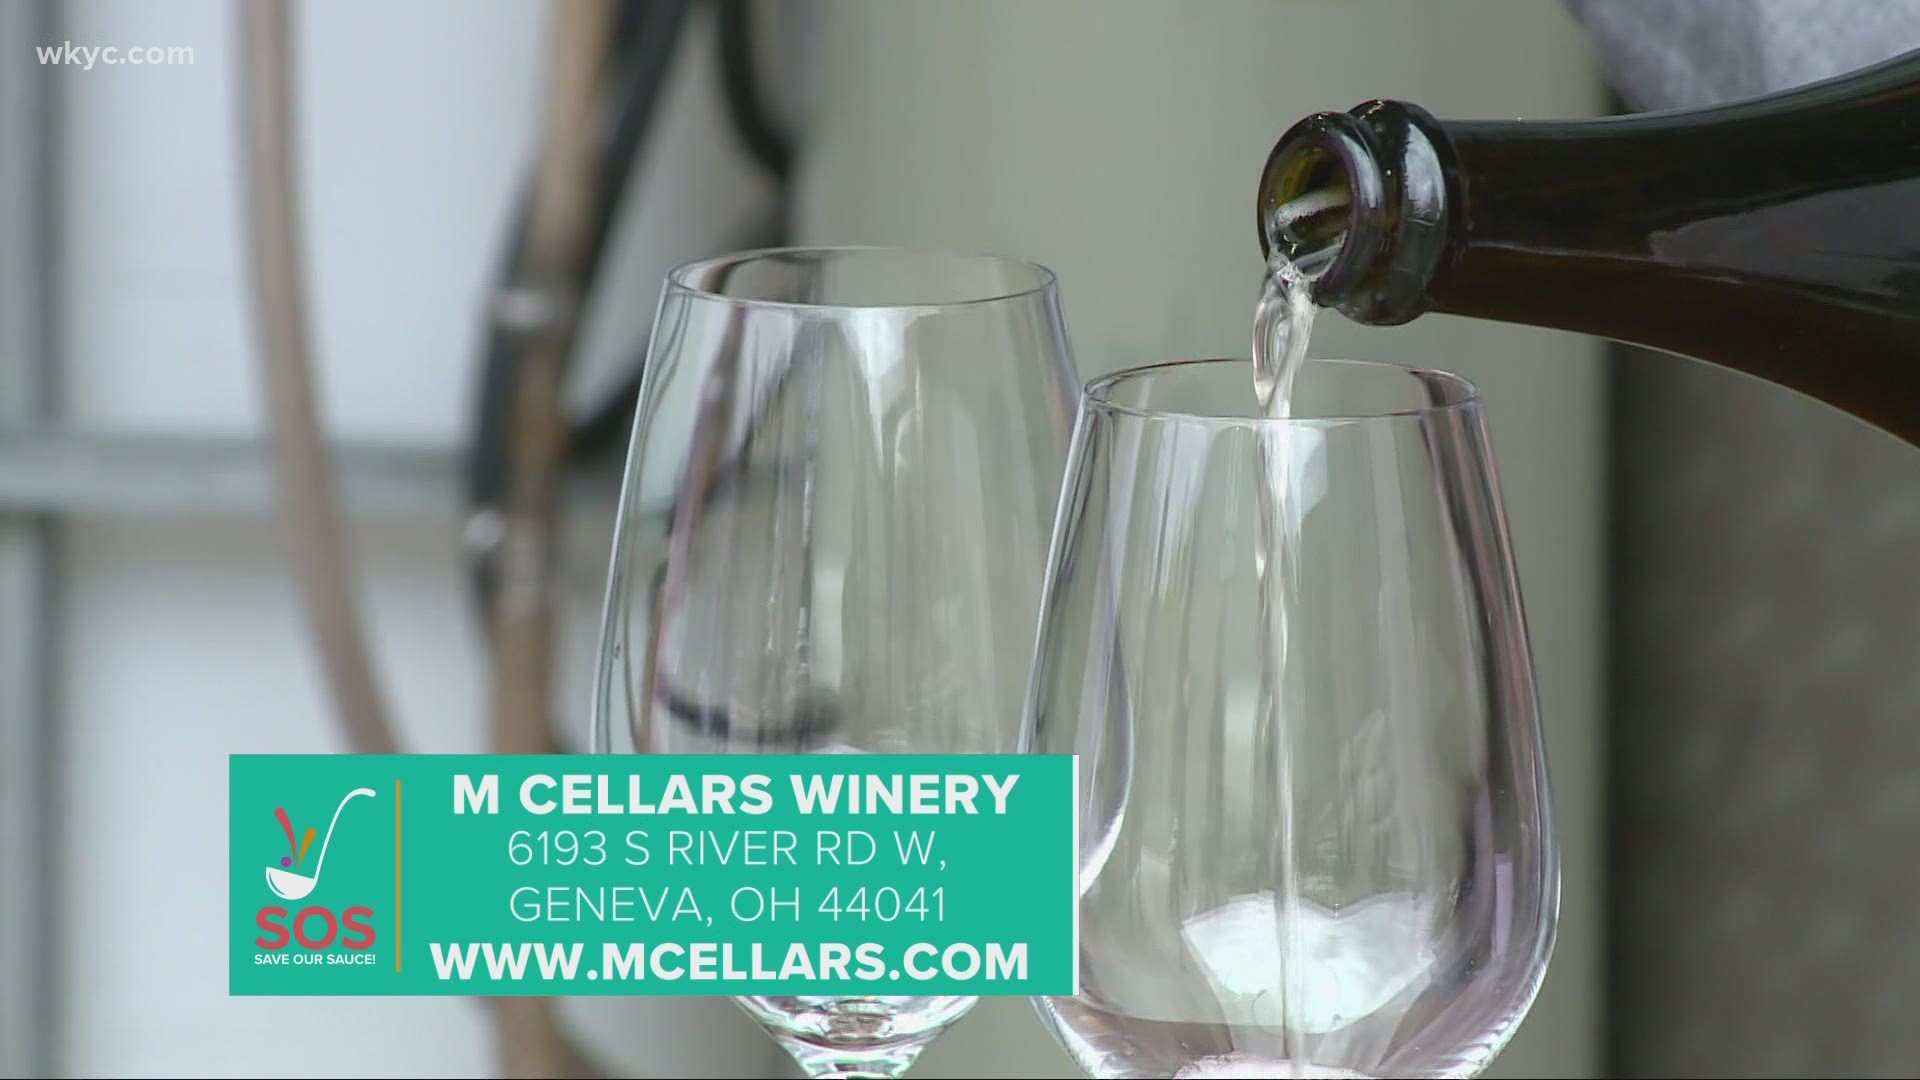 We're highlighting M Cellars Winery in Geneva as we continue the 'Save Our Sauce' campaign in support of Northeast Ohio restaurants amid the COVID-19 pandemic.